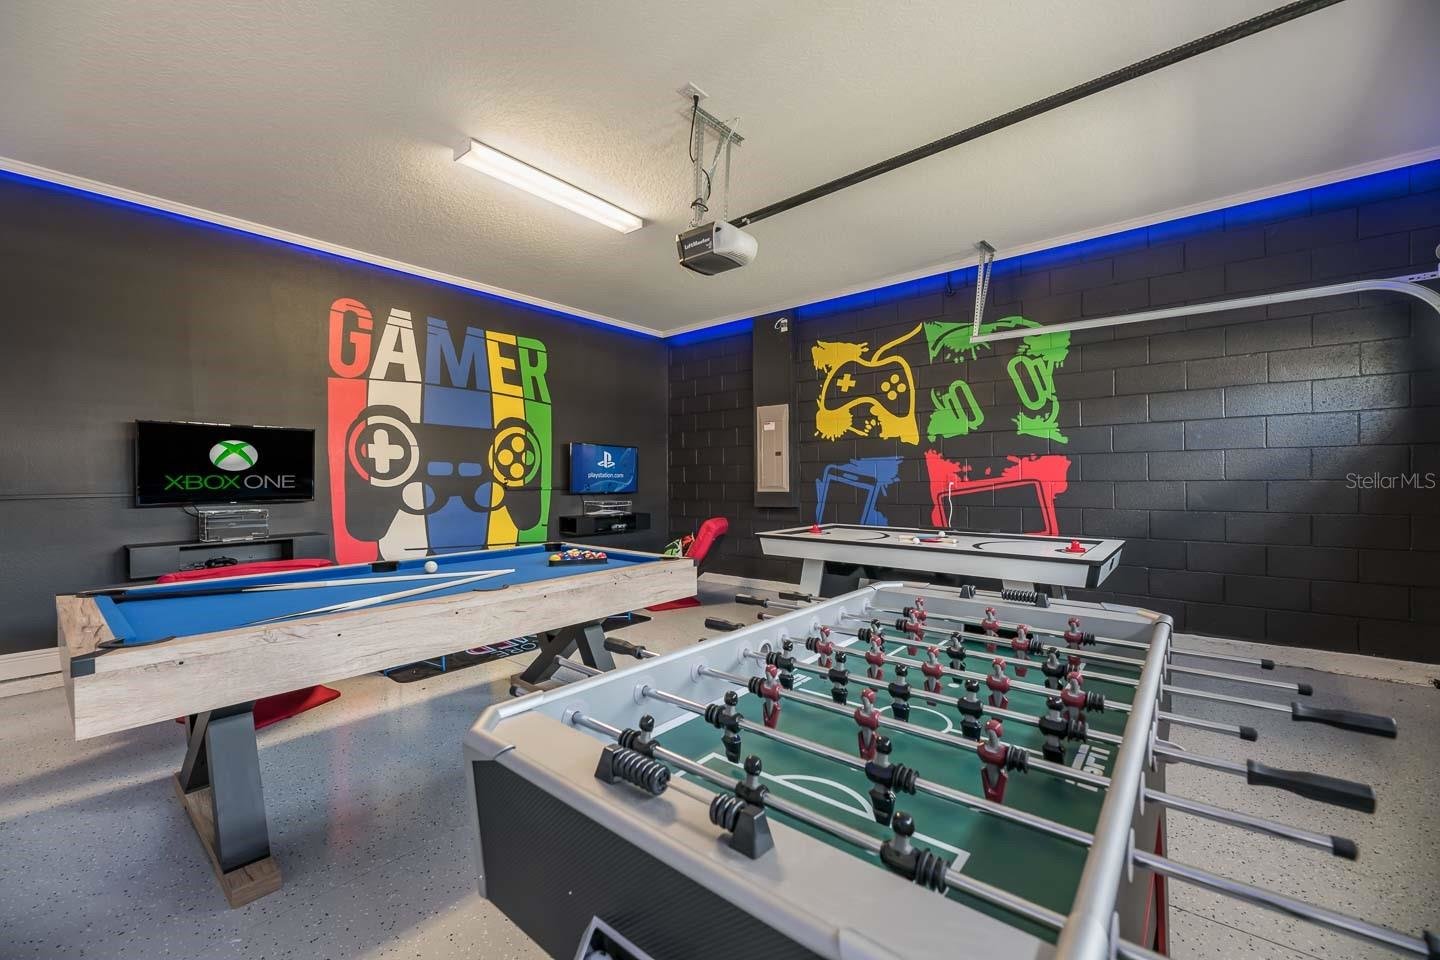 garage converted game room with black walls and spray paint designs